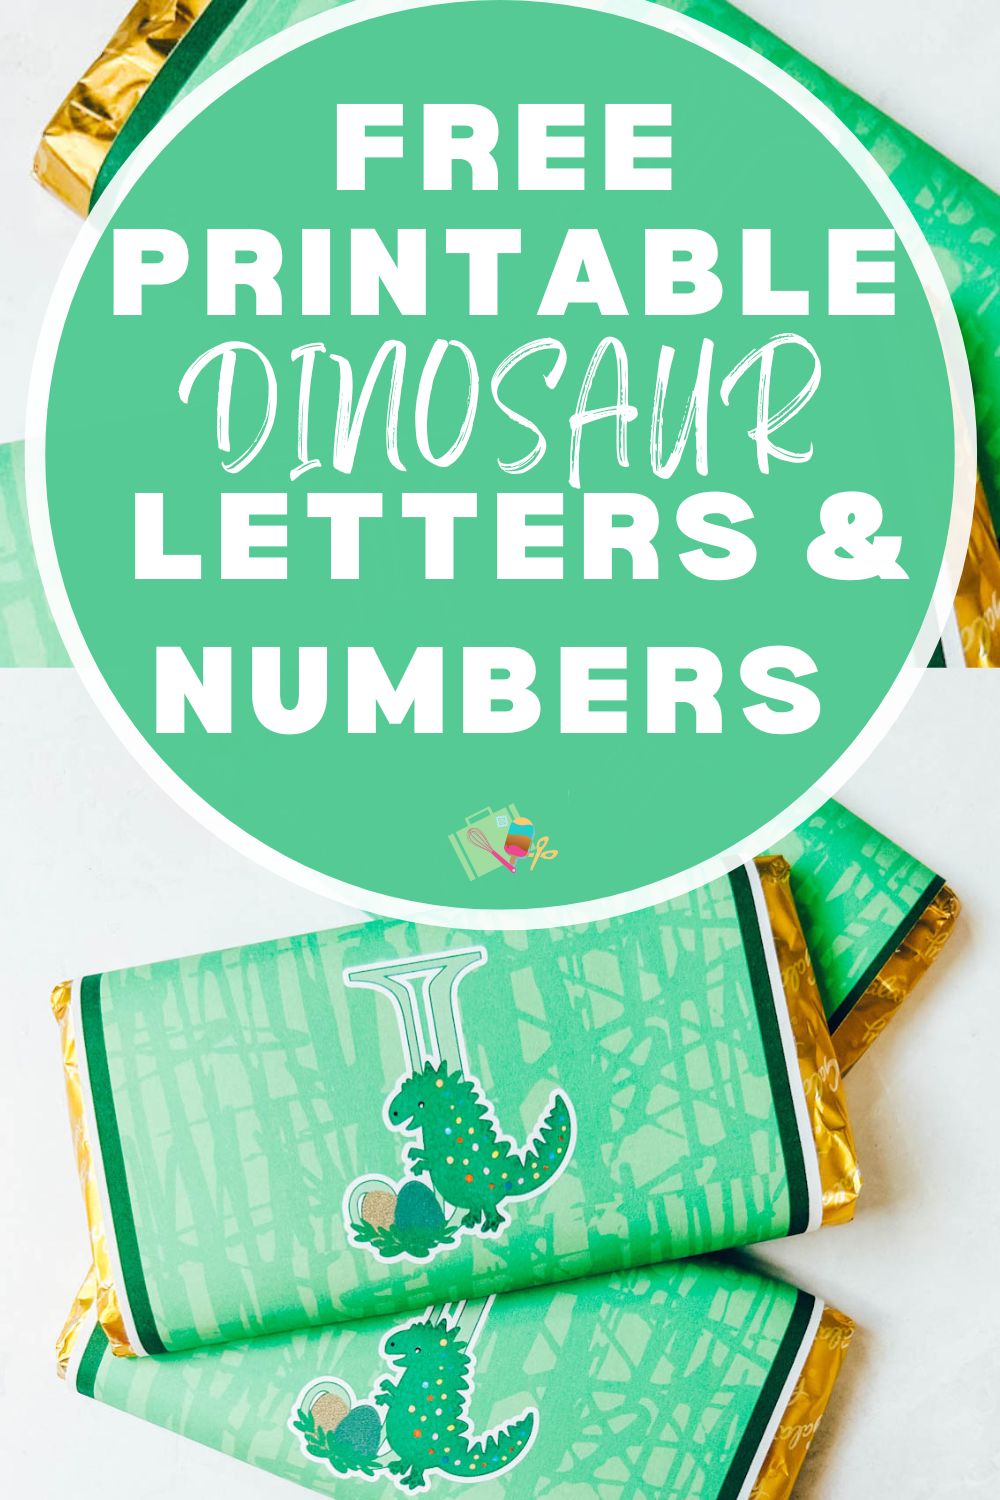 Free printable Dinosaur letters and Numbers